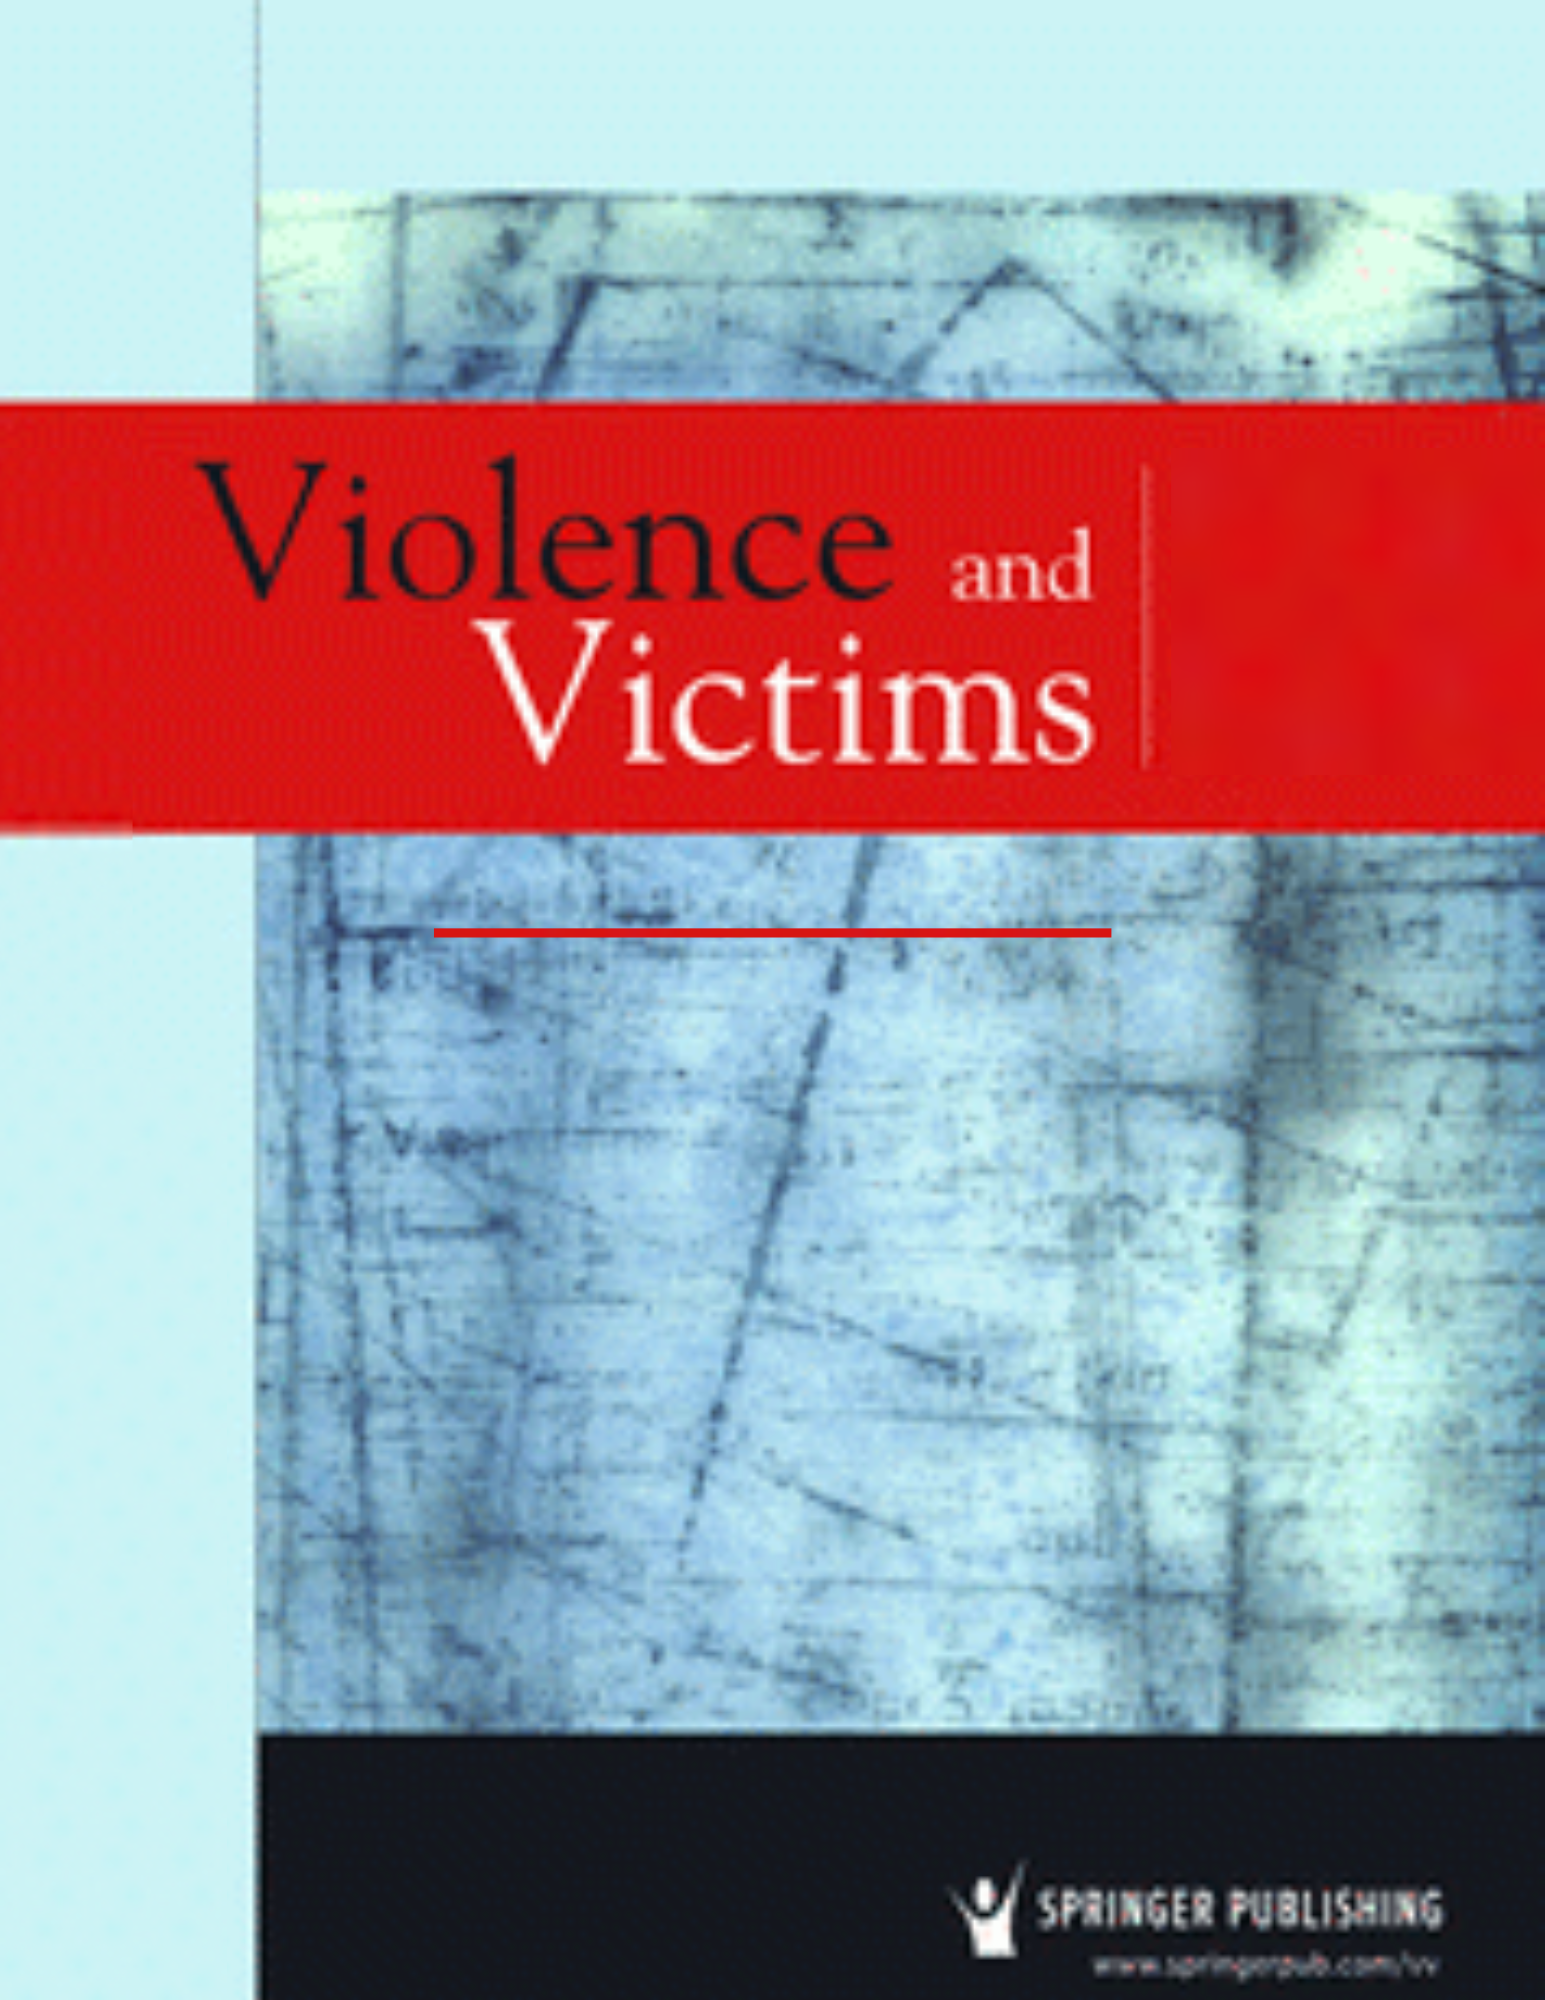 Violence and victims journal